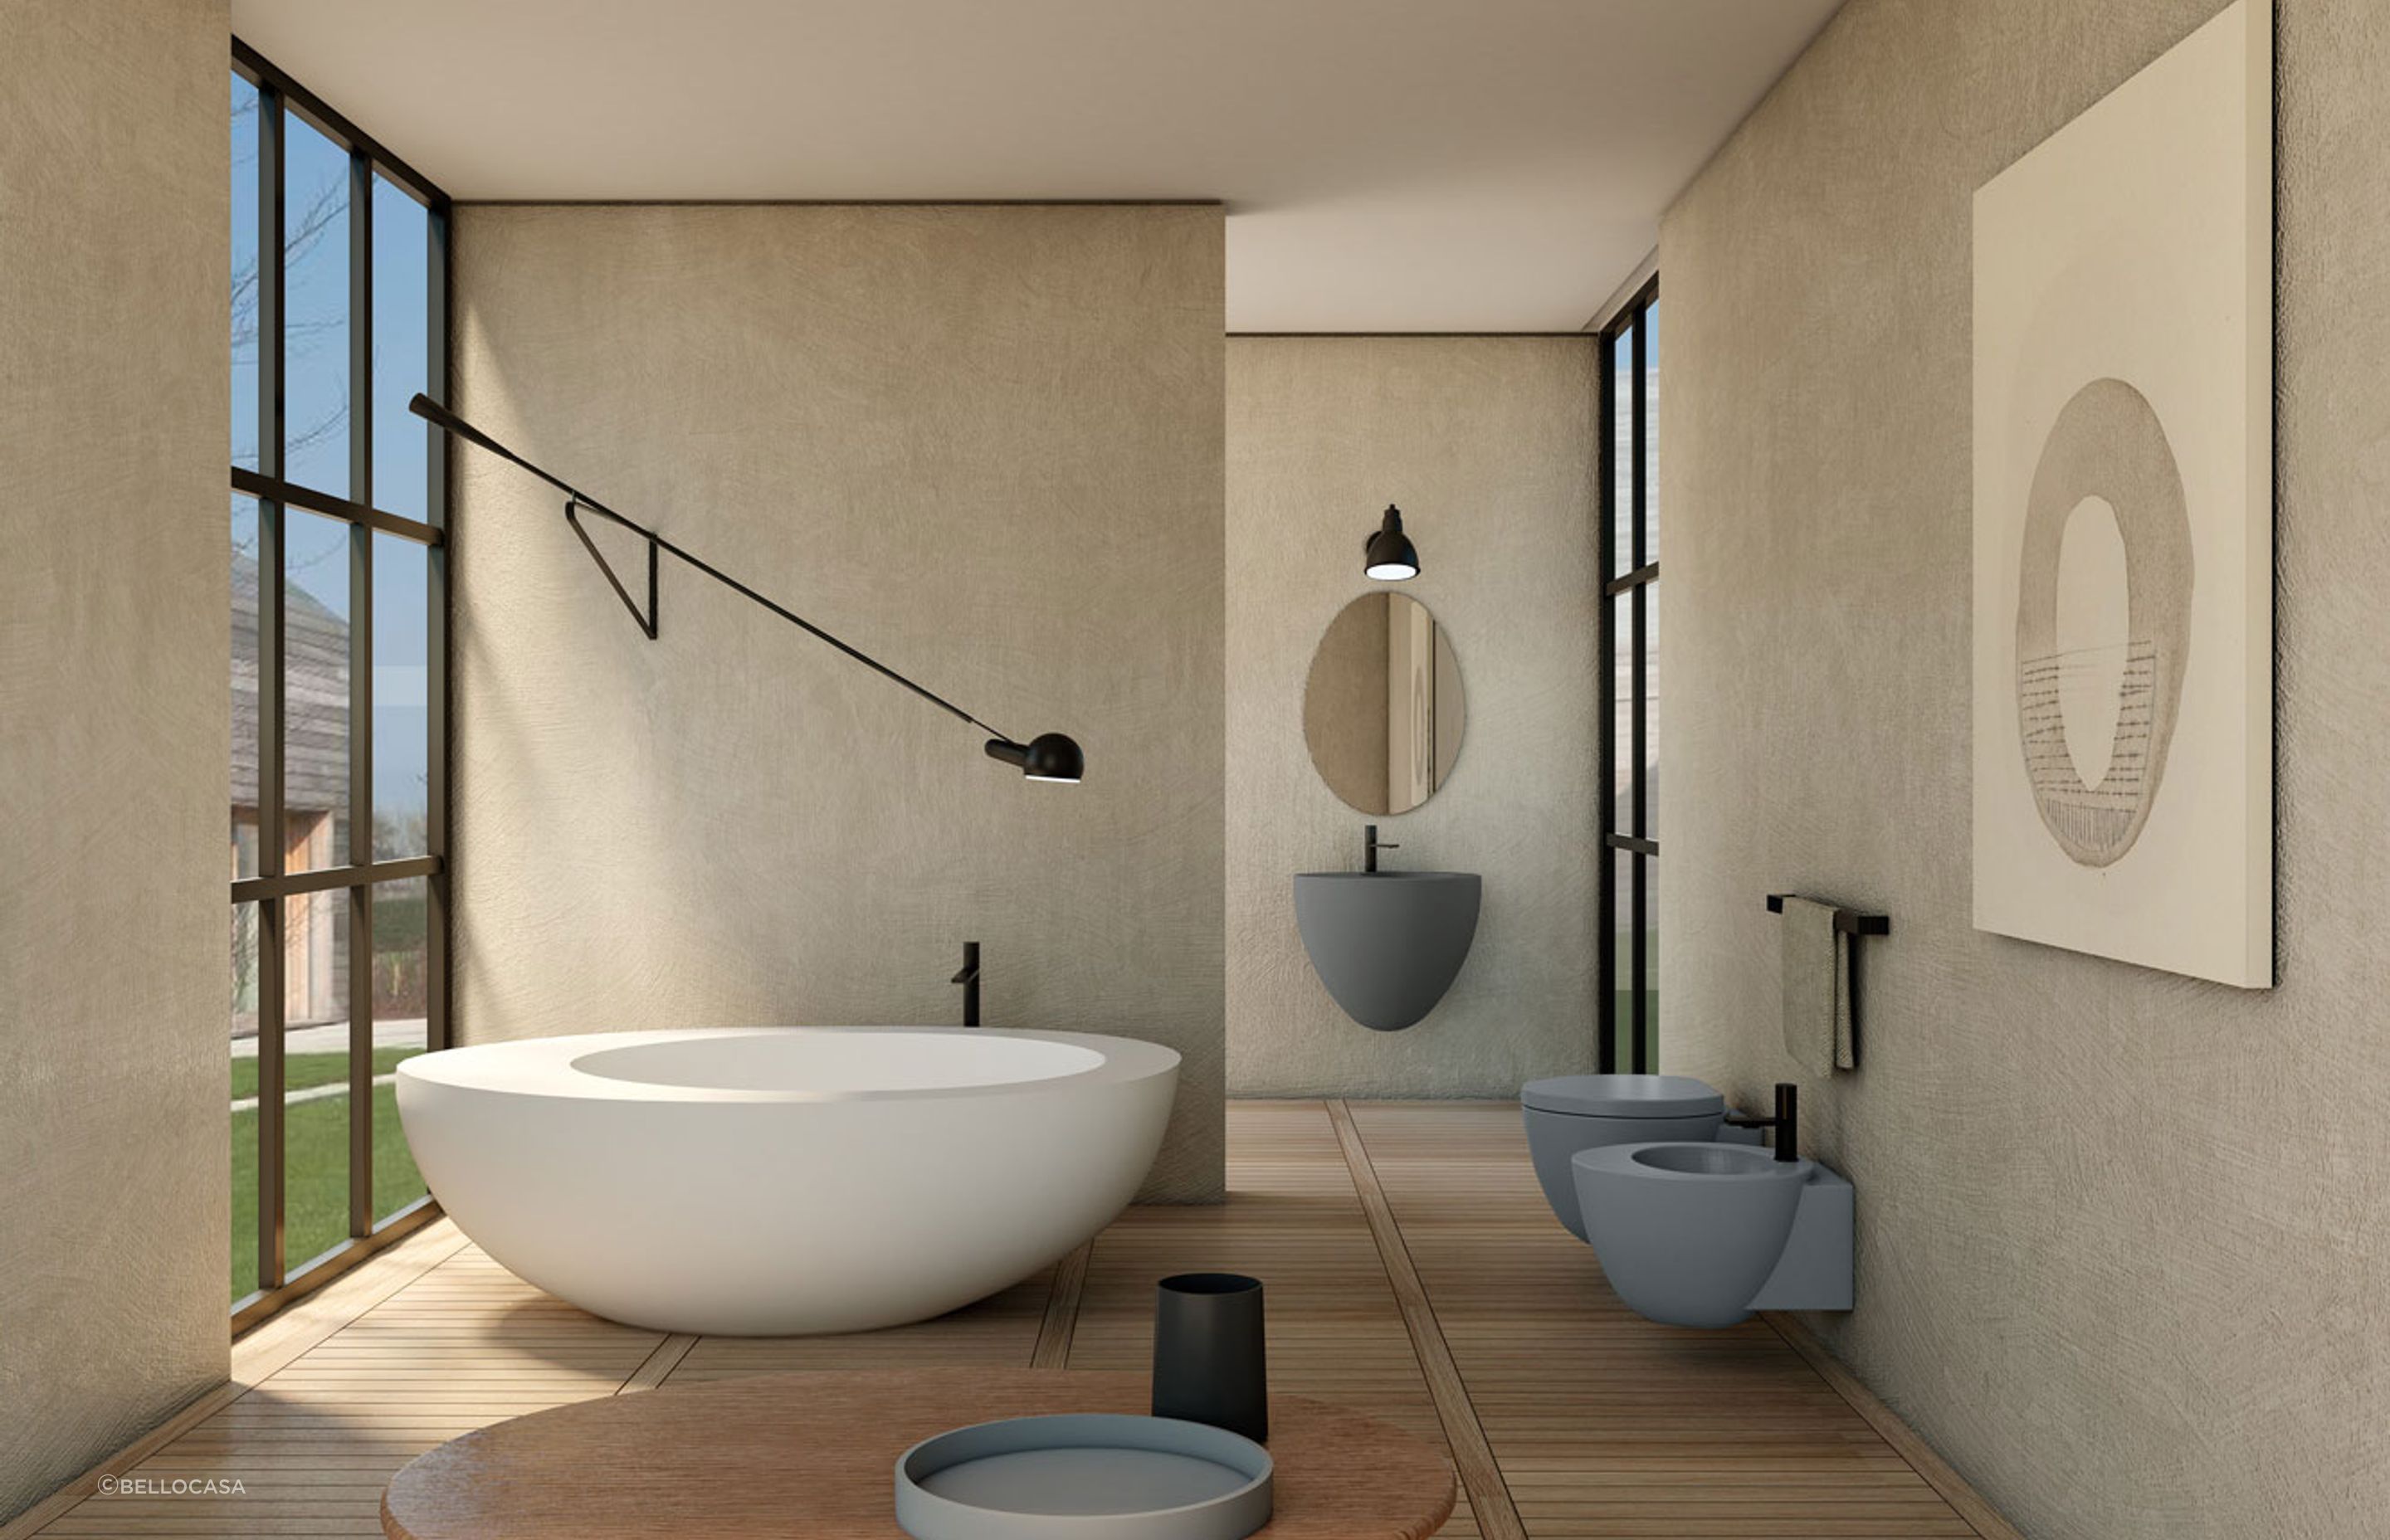 The curves of the Le Giare bathroom vanity by Ceramica offers a pleasing point of difference.